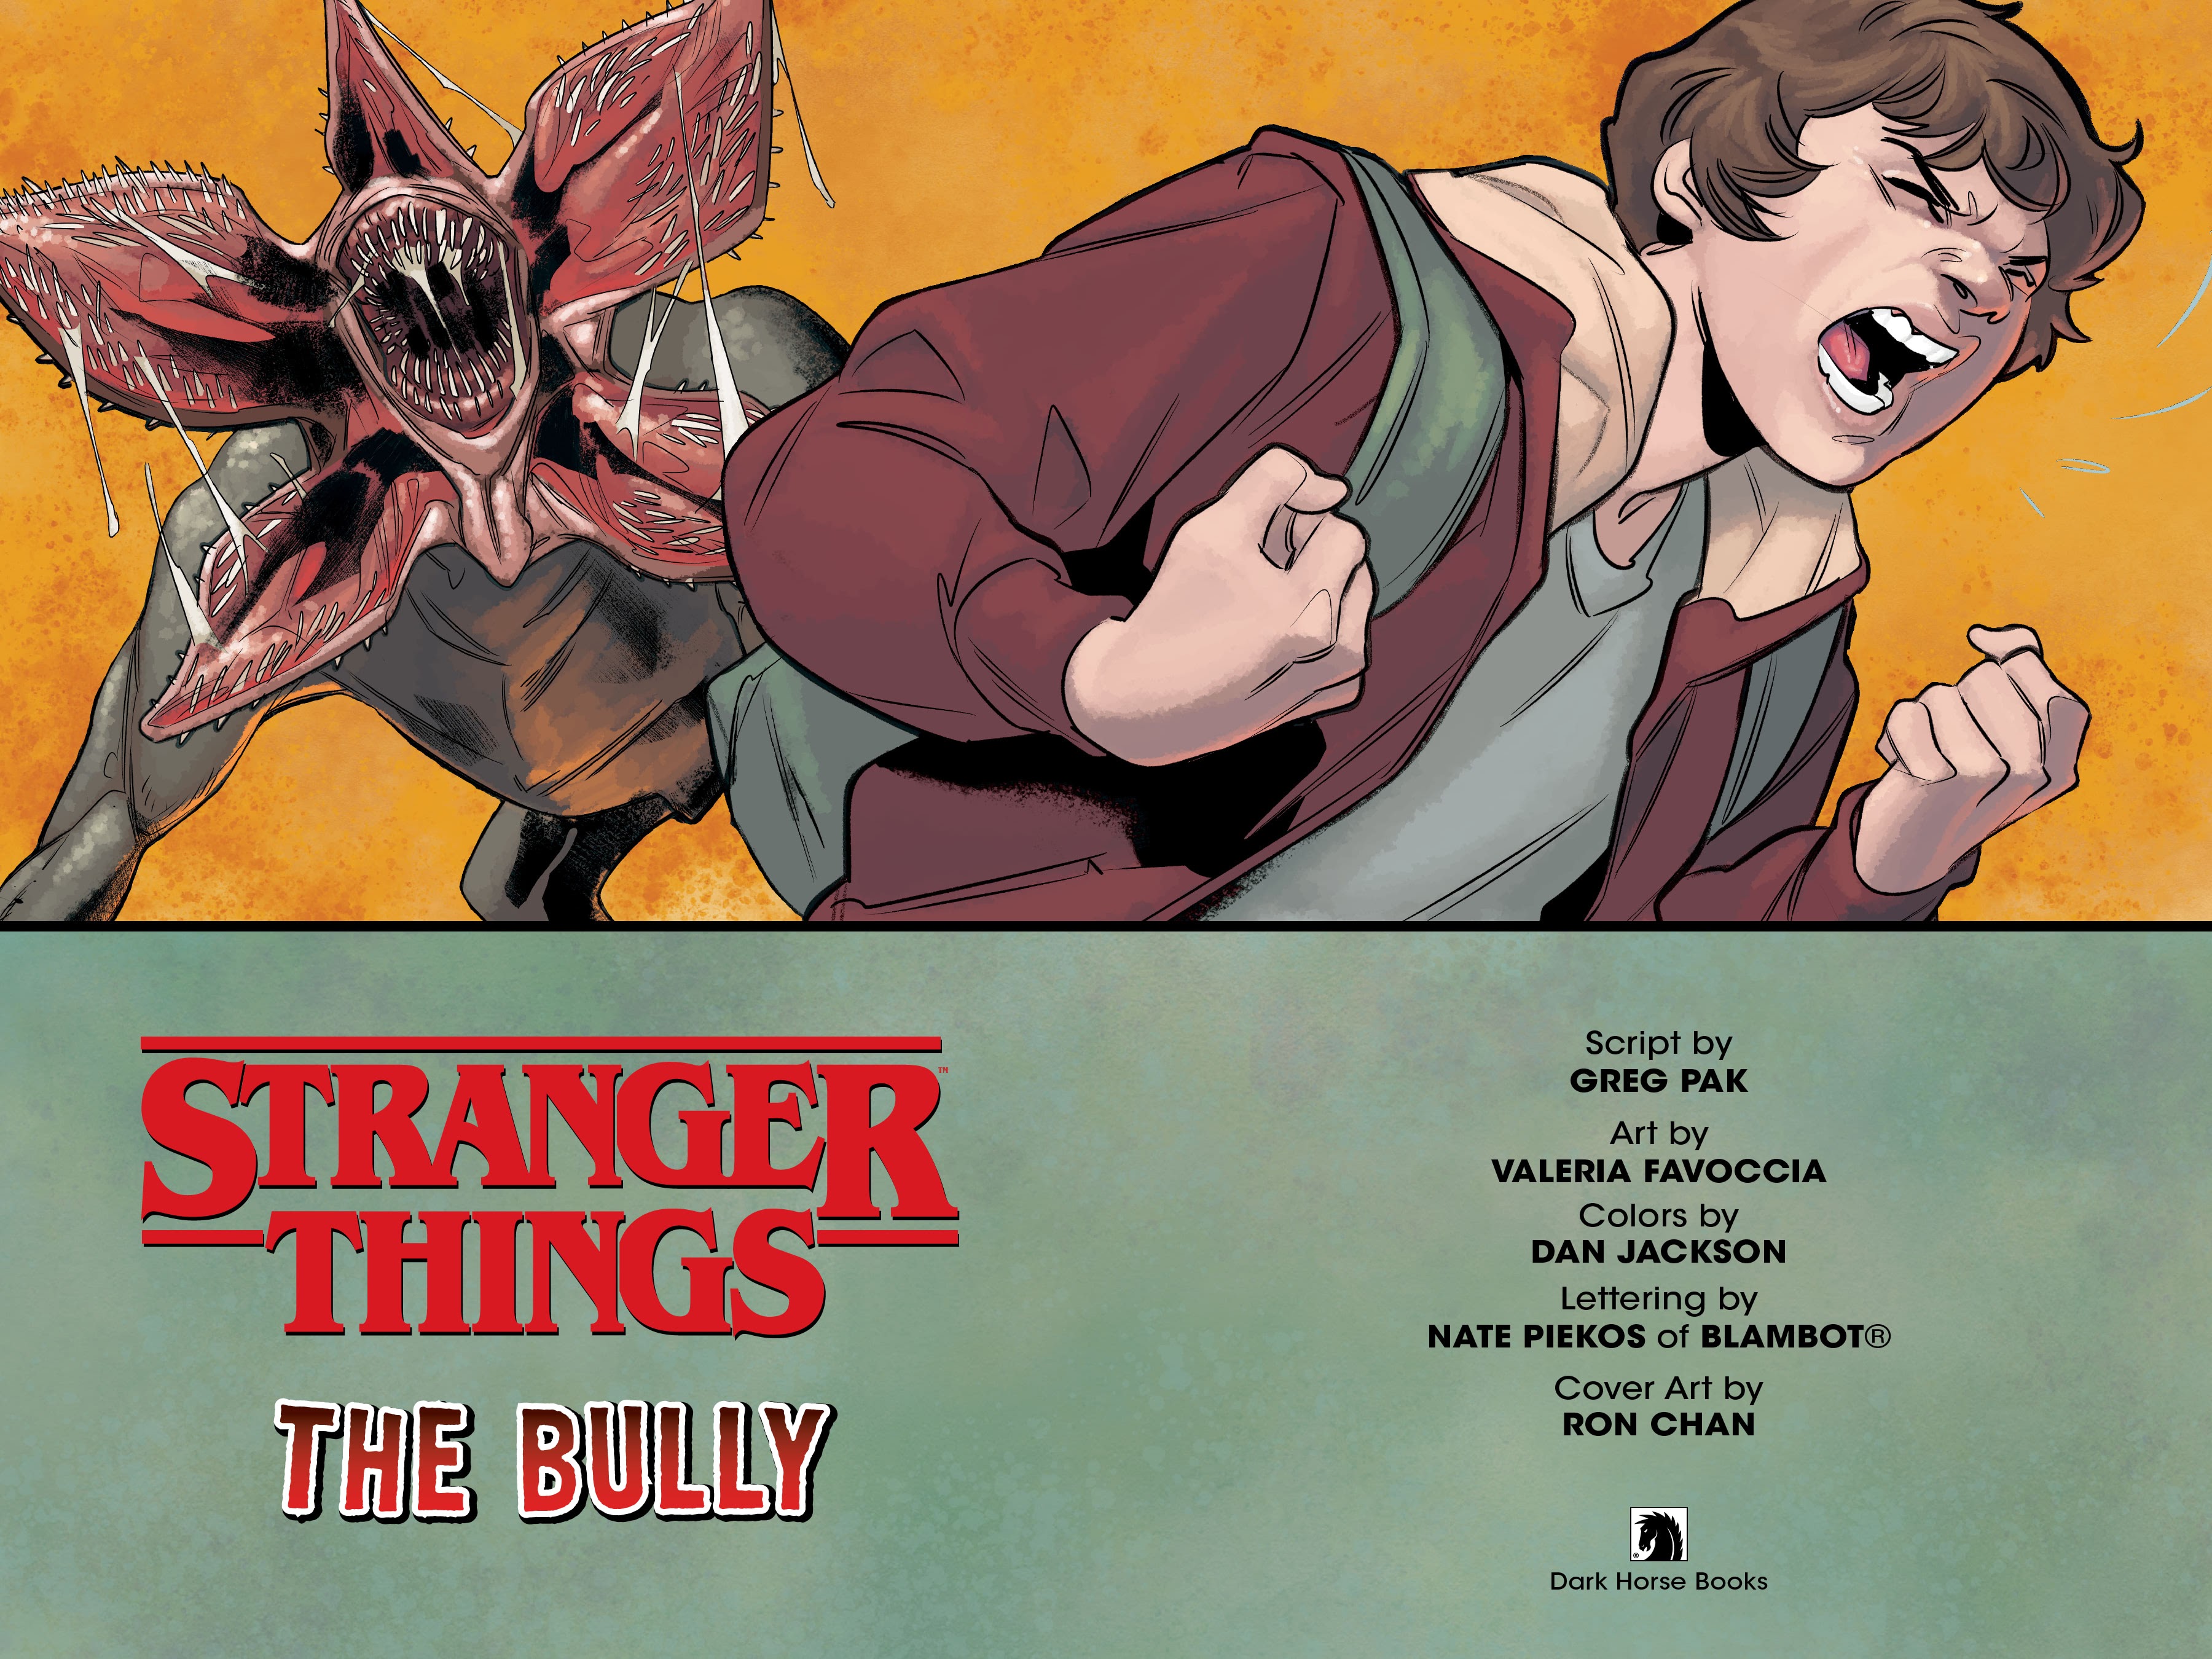 Read online Stranger Things: The Bully comic -  Issue # TPB - 3